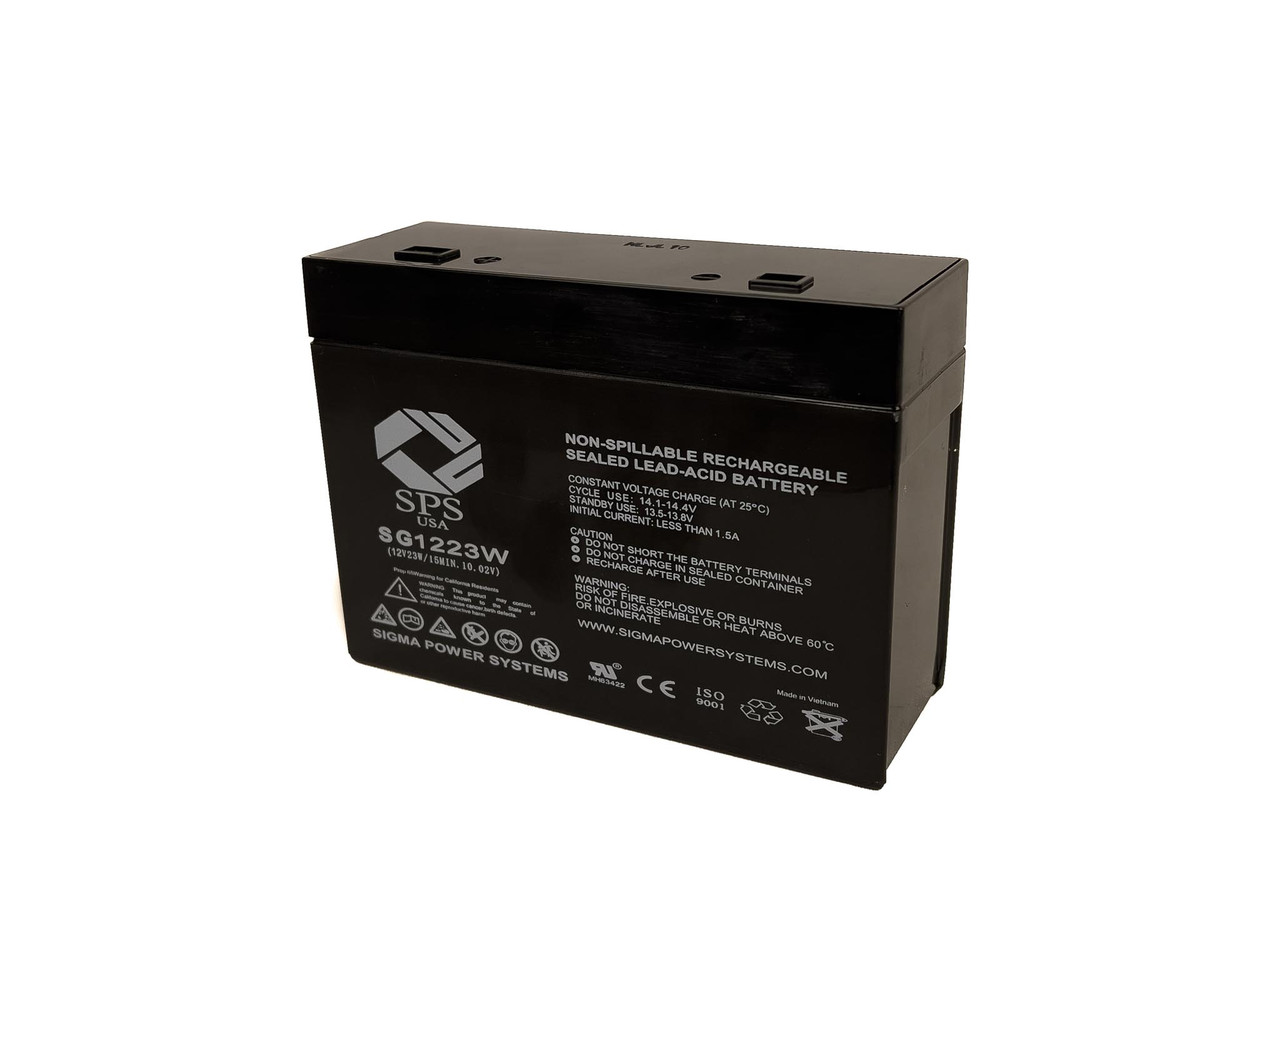 Raion Power 12V 5.2Ah 23W Non-Spillable Replacement Battery for Raion Power RG1223W